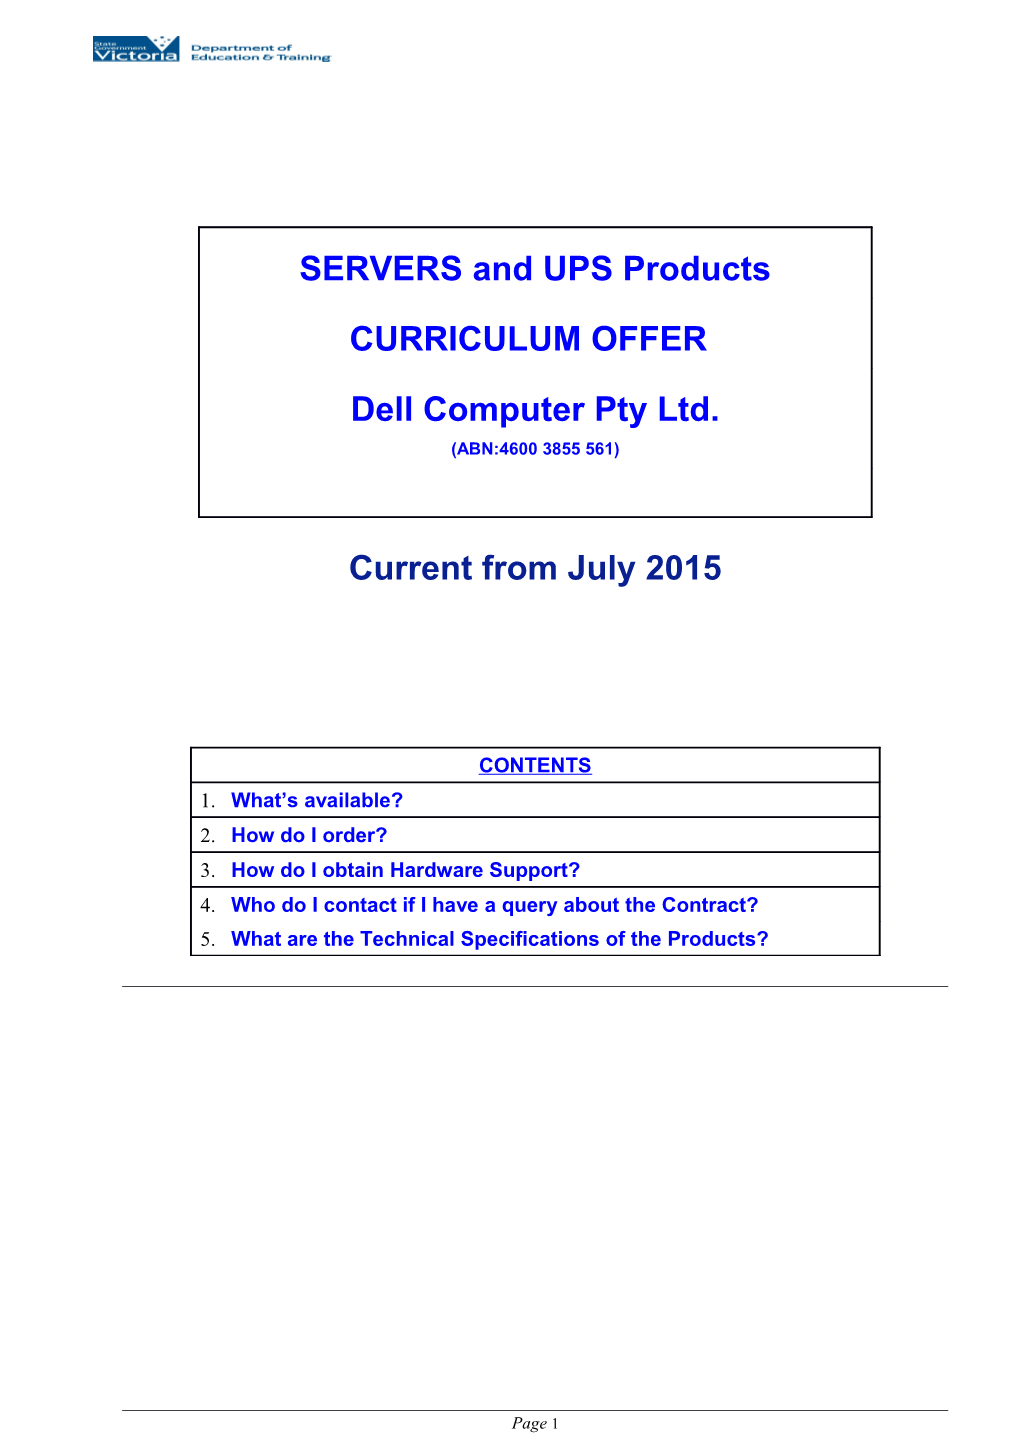 Dell Pricing for File Servers, UPS Devices & Back-Up Solutions - Curriculum